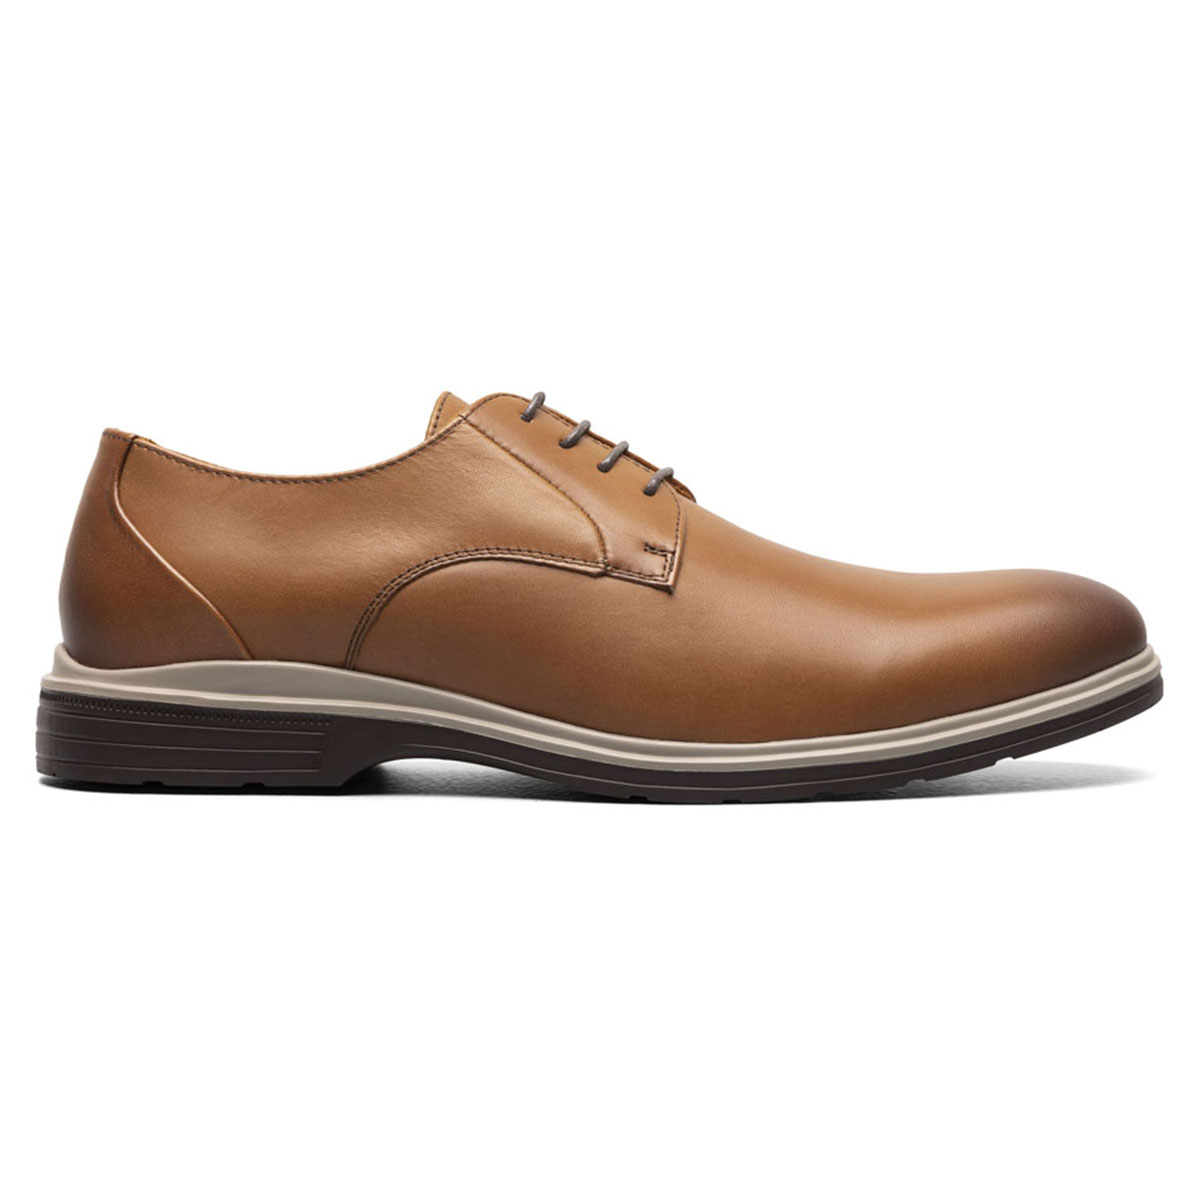 Men's Shoes | Work & Casual Styles | Discount Prices | Boscov's